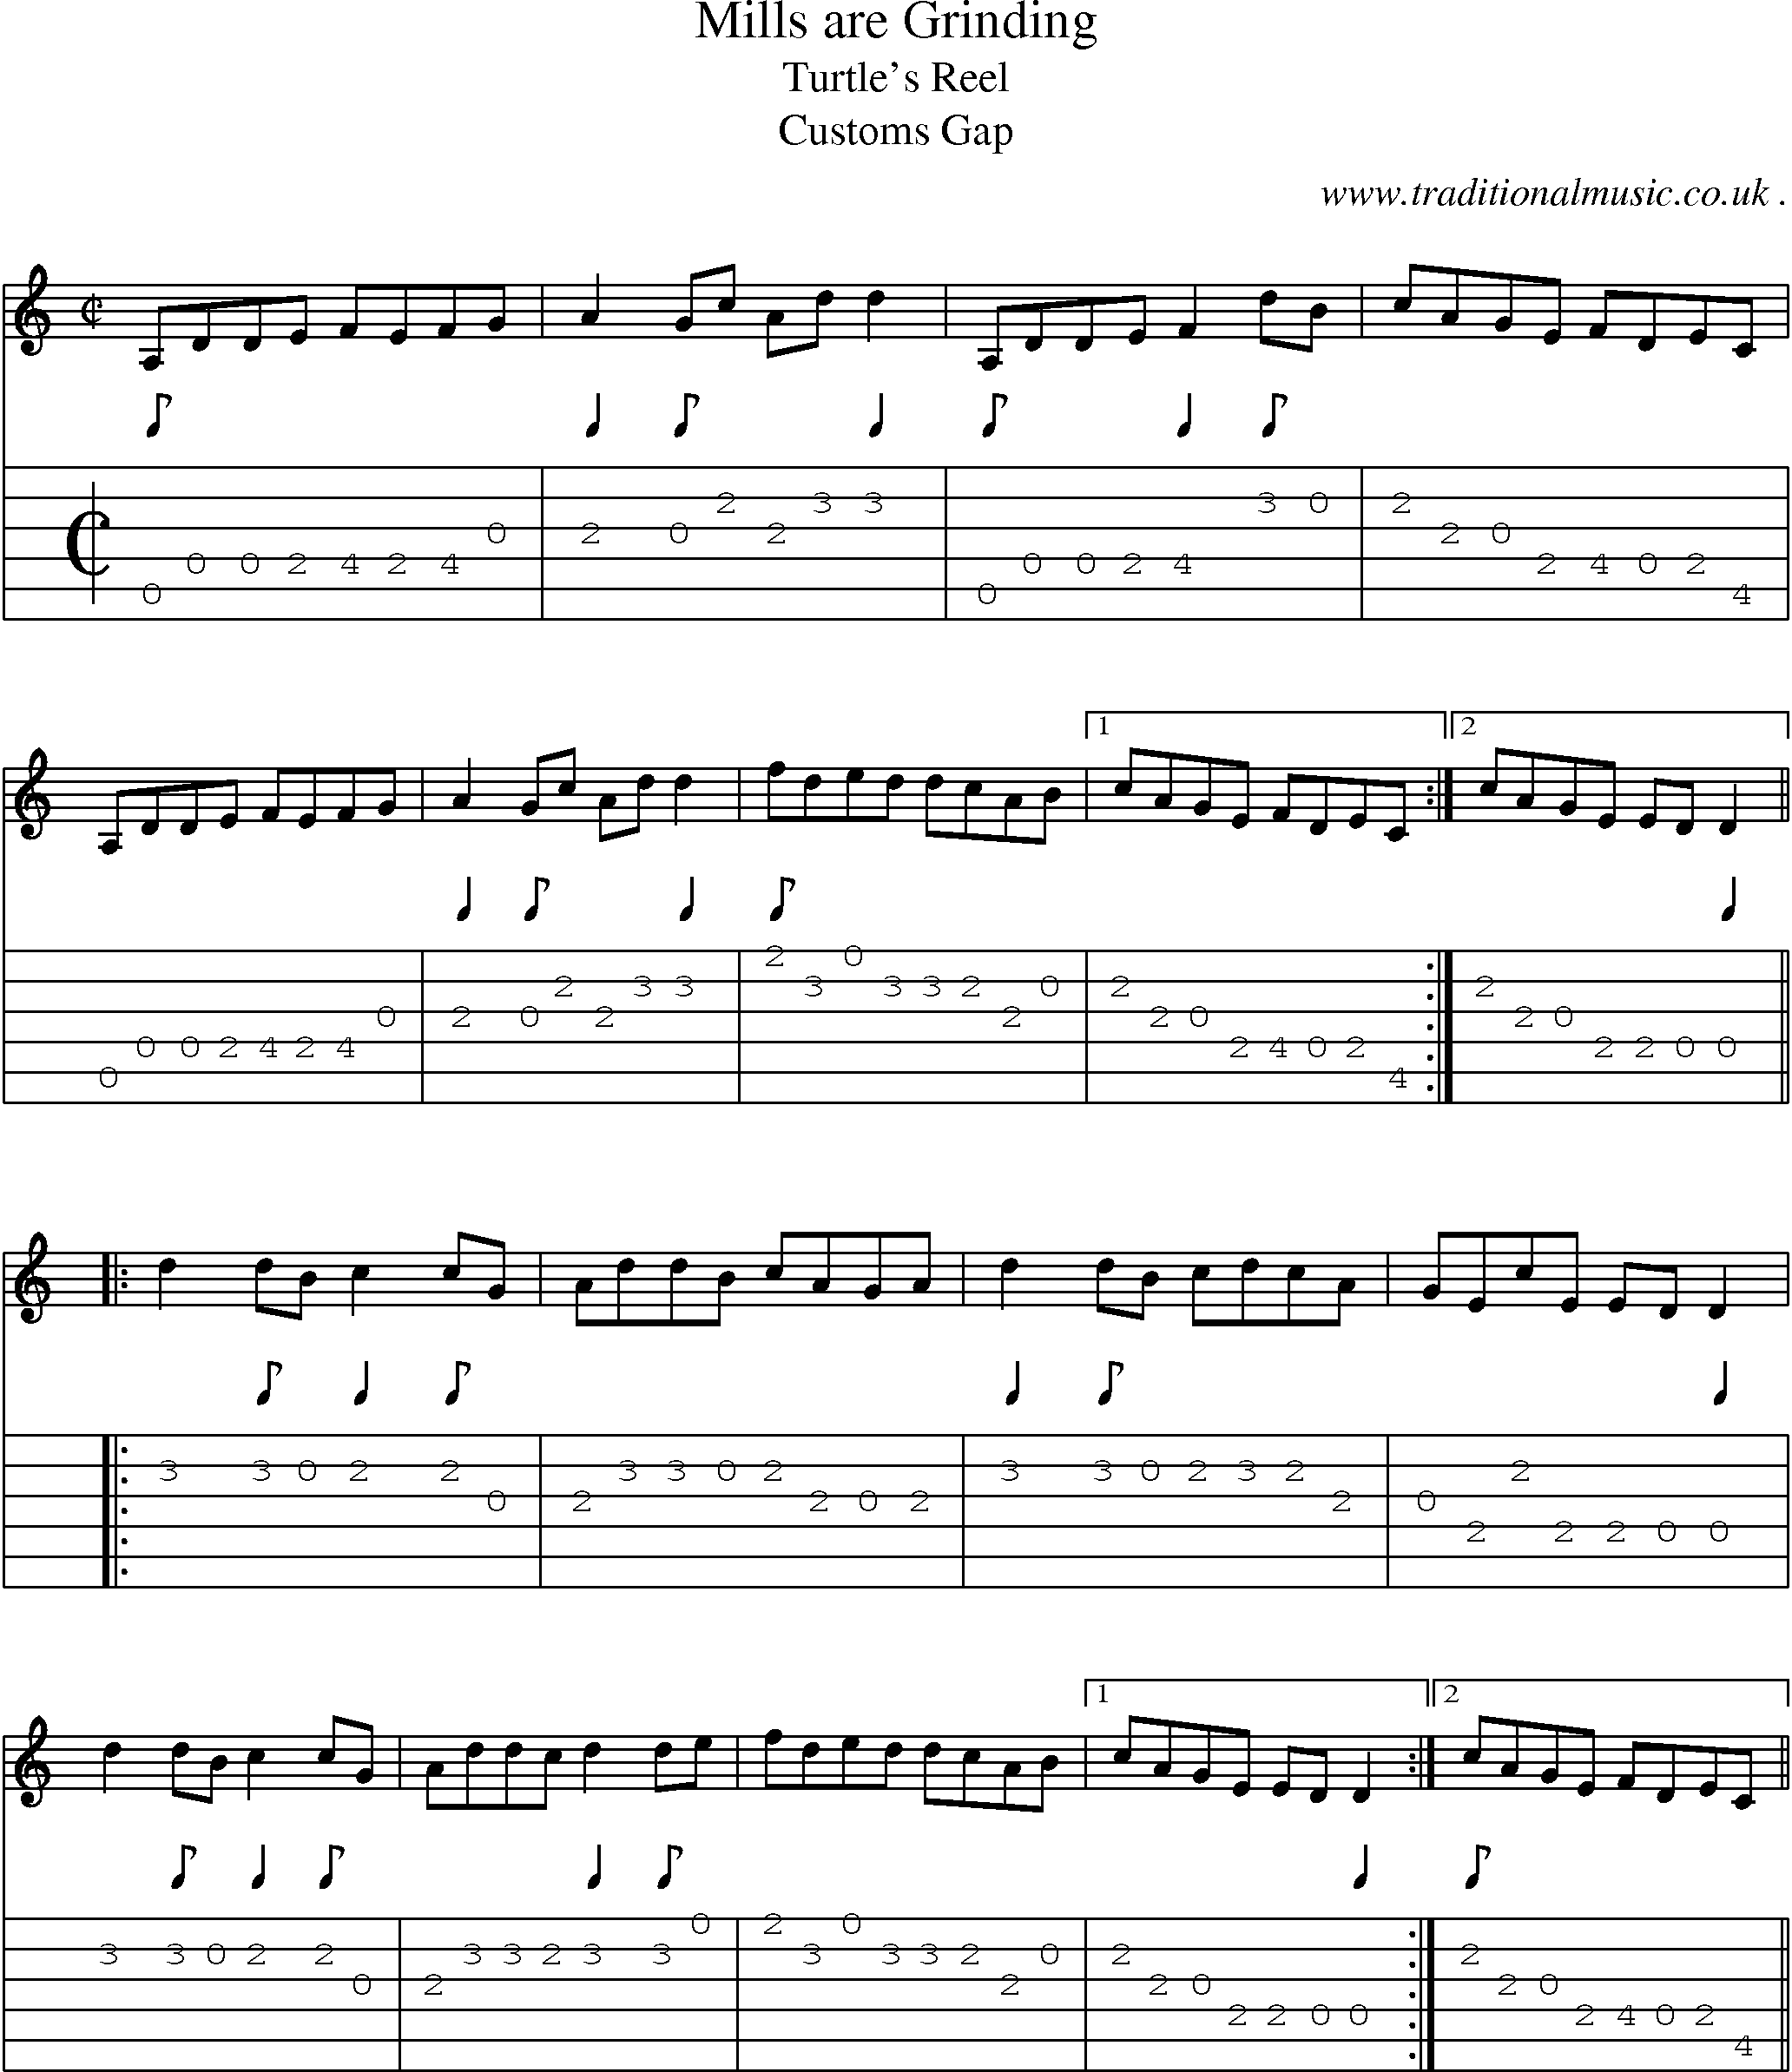 Sheet-Music and Guitar Tabs for Mills Are Grinding